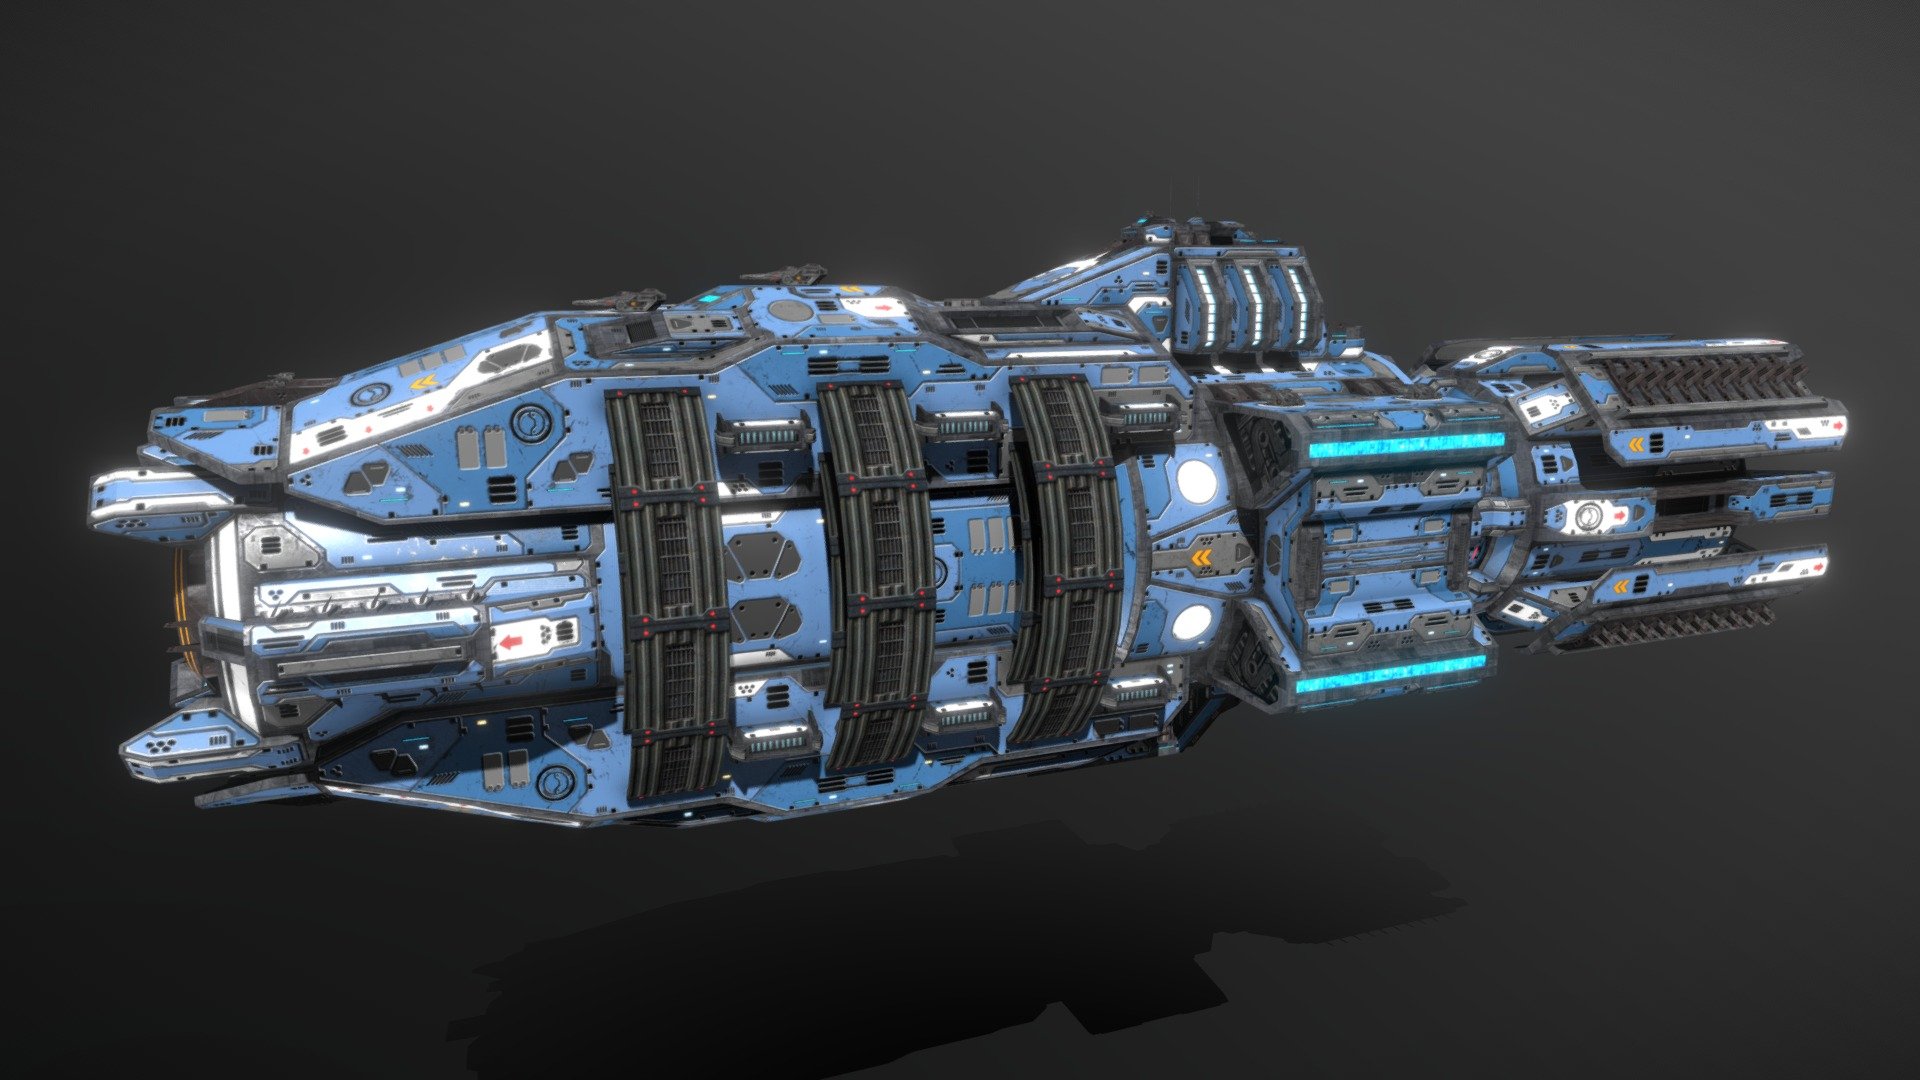 This is a model of a low-poly and game-ready scifi spaceship. 

The weapons are separate meshes and can be animated with a keyframe animation tool. The weapon loadout can be changed as well.

The model comes with several differently colored texture sets. The PSD file with intact layers is included too.

Please note: The textures in the Sketchfab viewer have a reduced resolution to improve Sketchfab loading speed.

If you have purchased this model please make sure to download the “additional file”.  It contains FBX and OBJ meshes, full resolution textures and the source PSDs with intact layers. The meshes are separate and can be animated (e.g. firing animations for gun barrels, rotating turrets, etc) 3d model